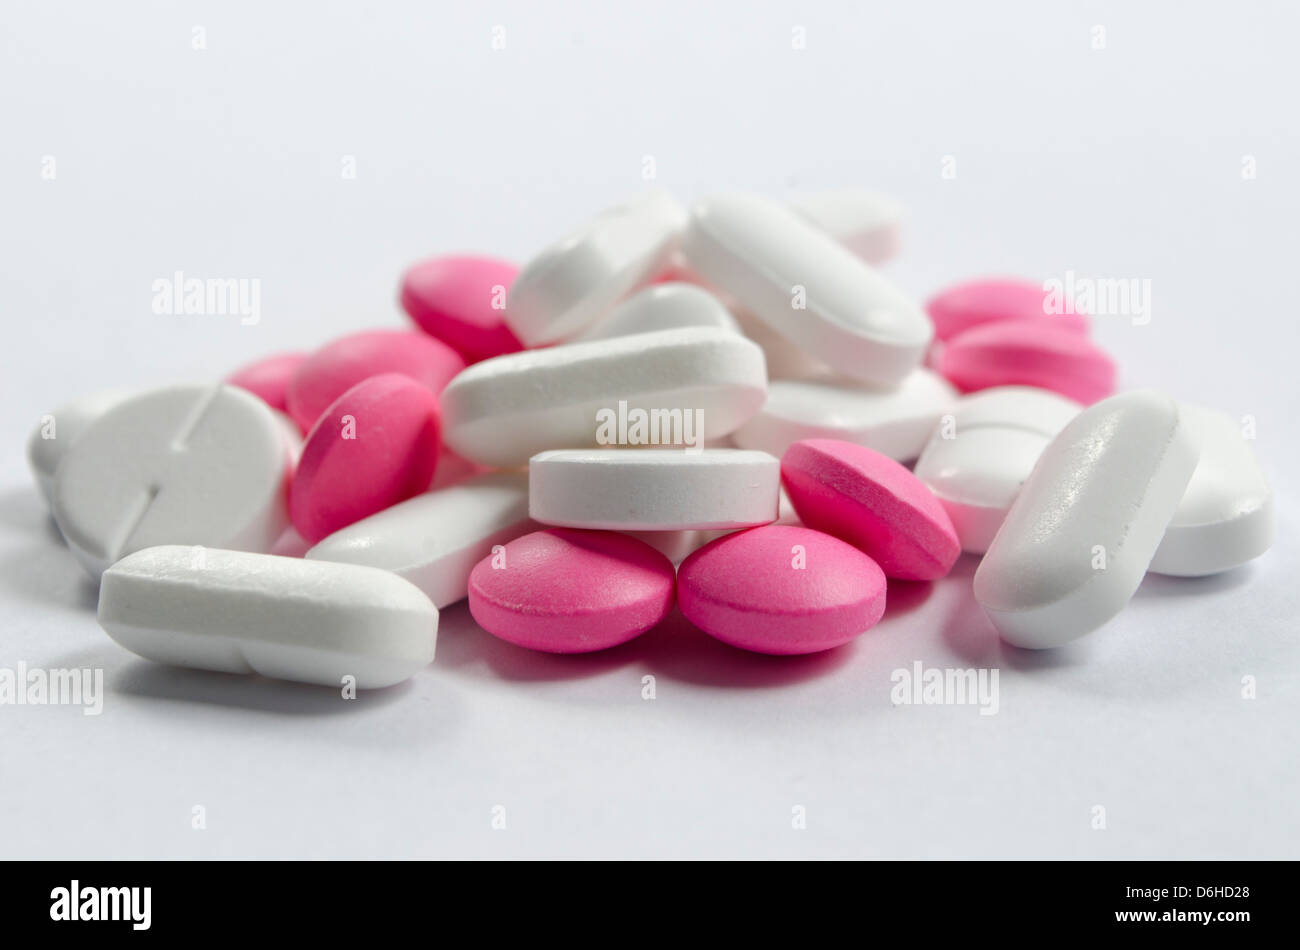 Assorted painkillers Stock Photo